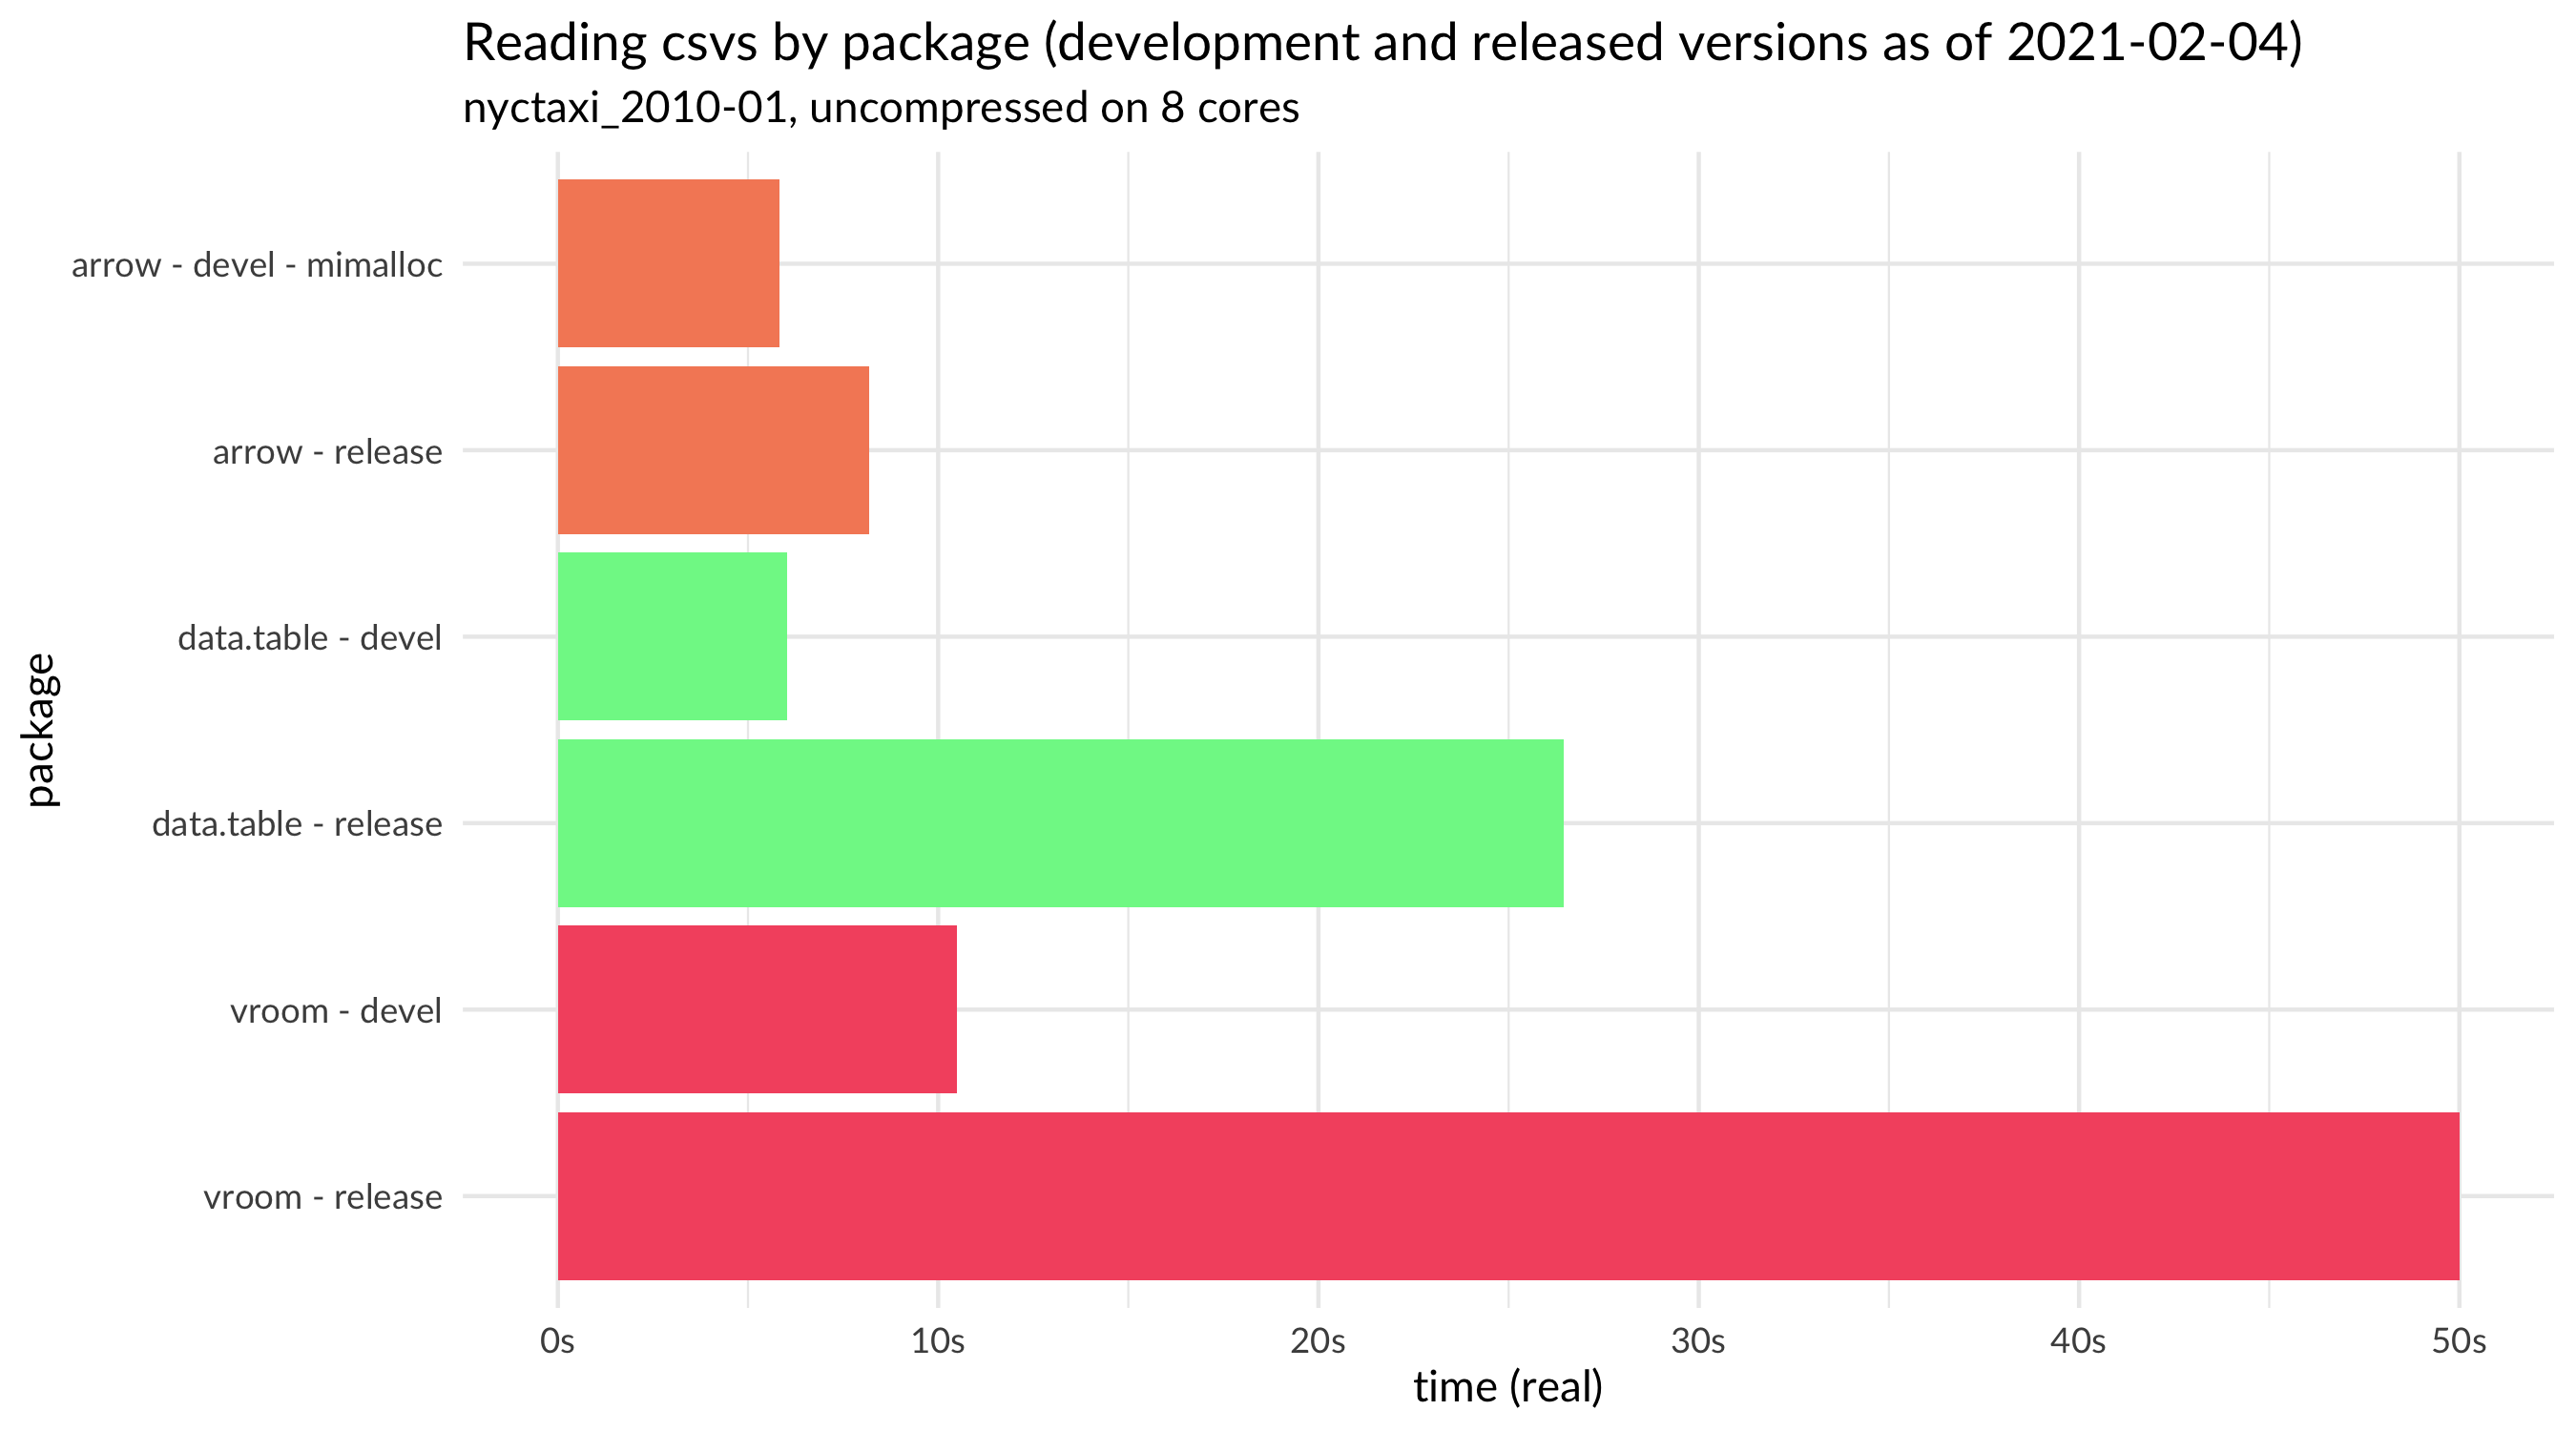 A bar chart showing differences between release and development versions of the arrow, data.table, and vroom pacakges. For the arrow package, the development version is using mimalloc. Arrow devel and data.table devel show similar speeds. The devel version of vroom is much faster than the release reflecting the update made in writing this post. Dataset: uncompressed nyctaxi_2010-01 dataset with 8 cores